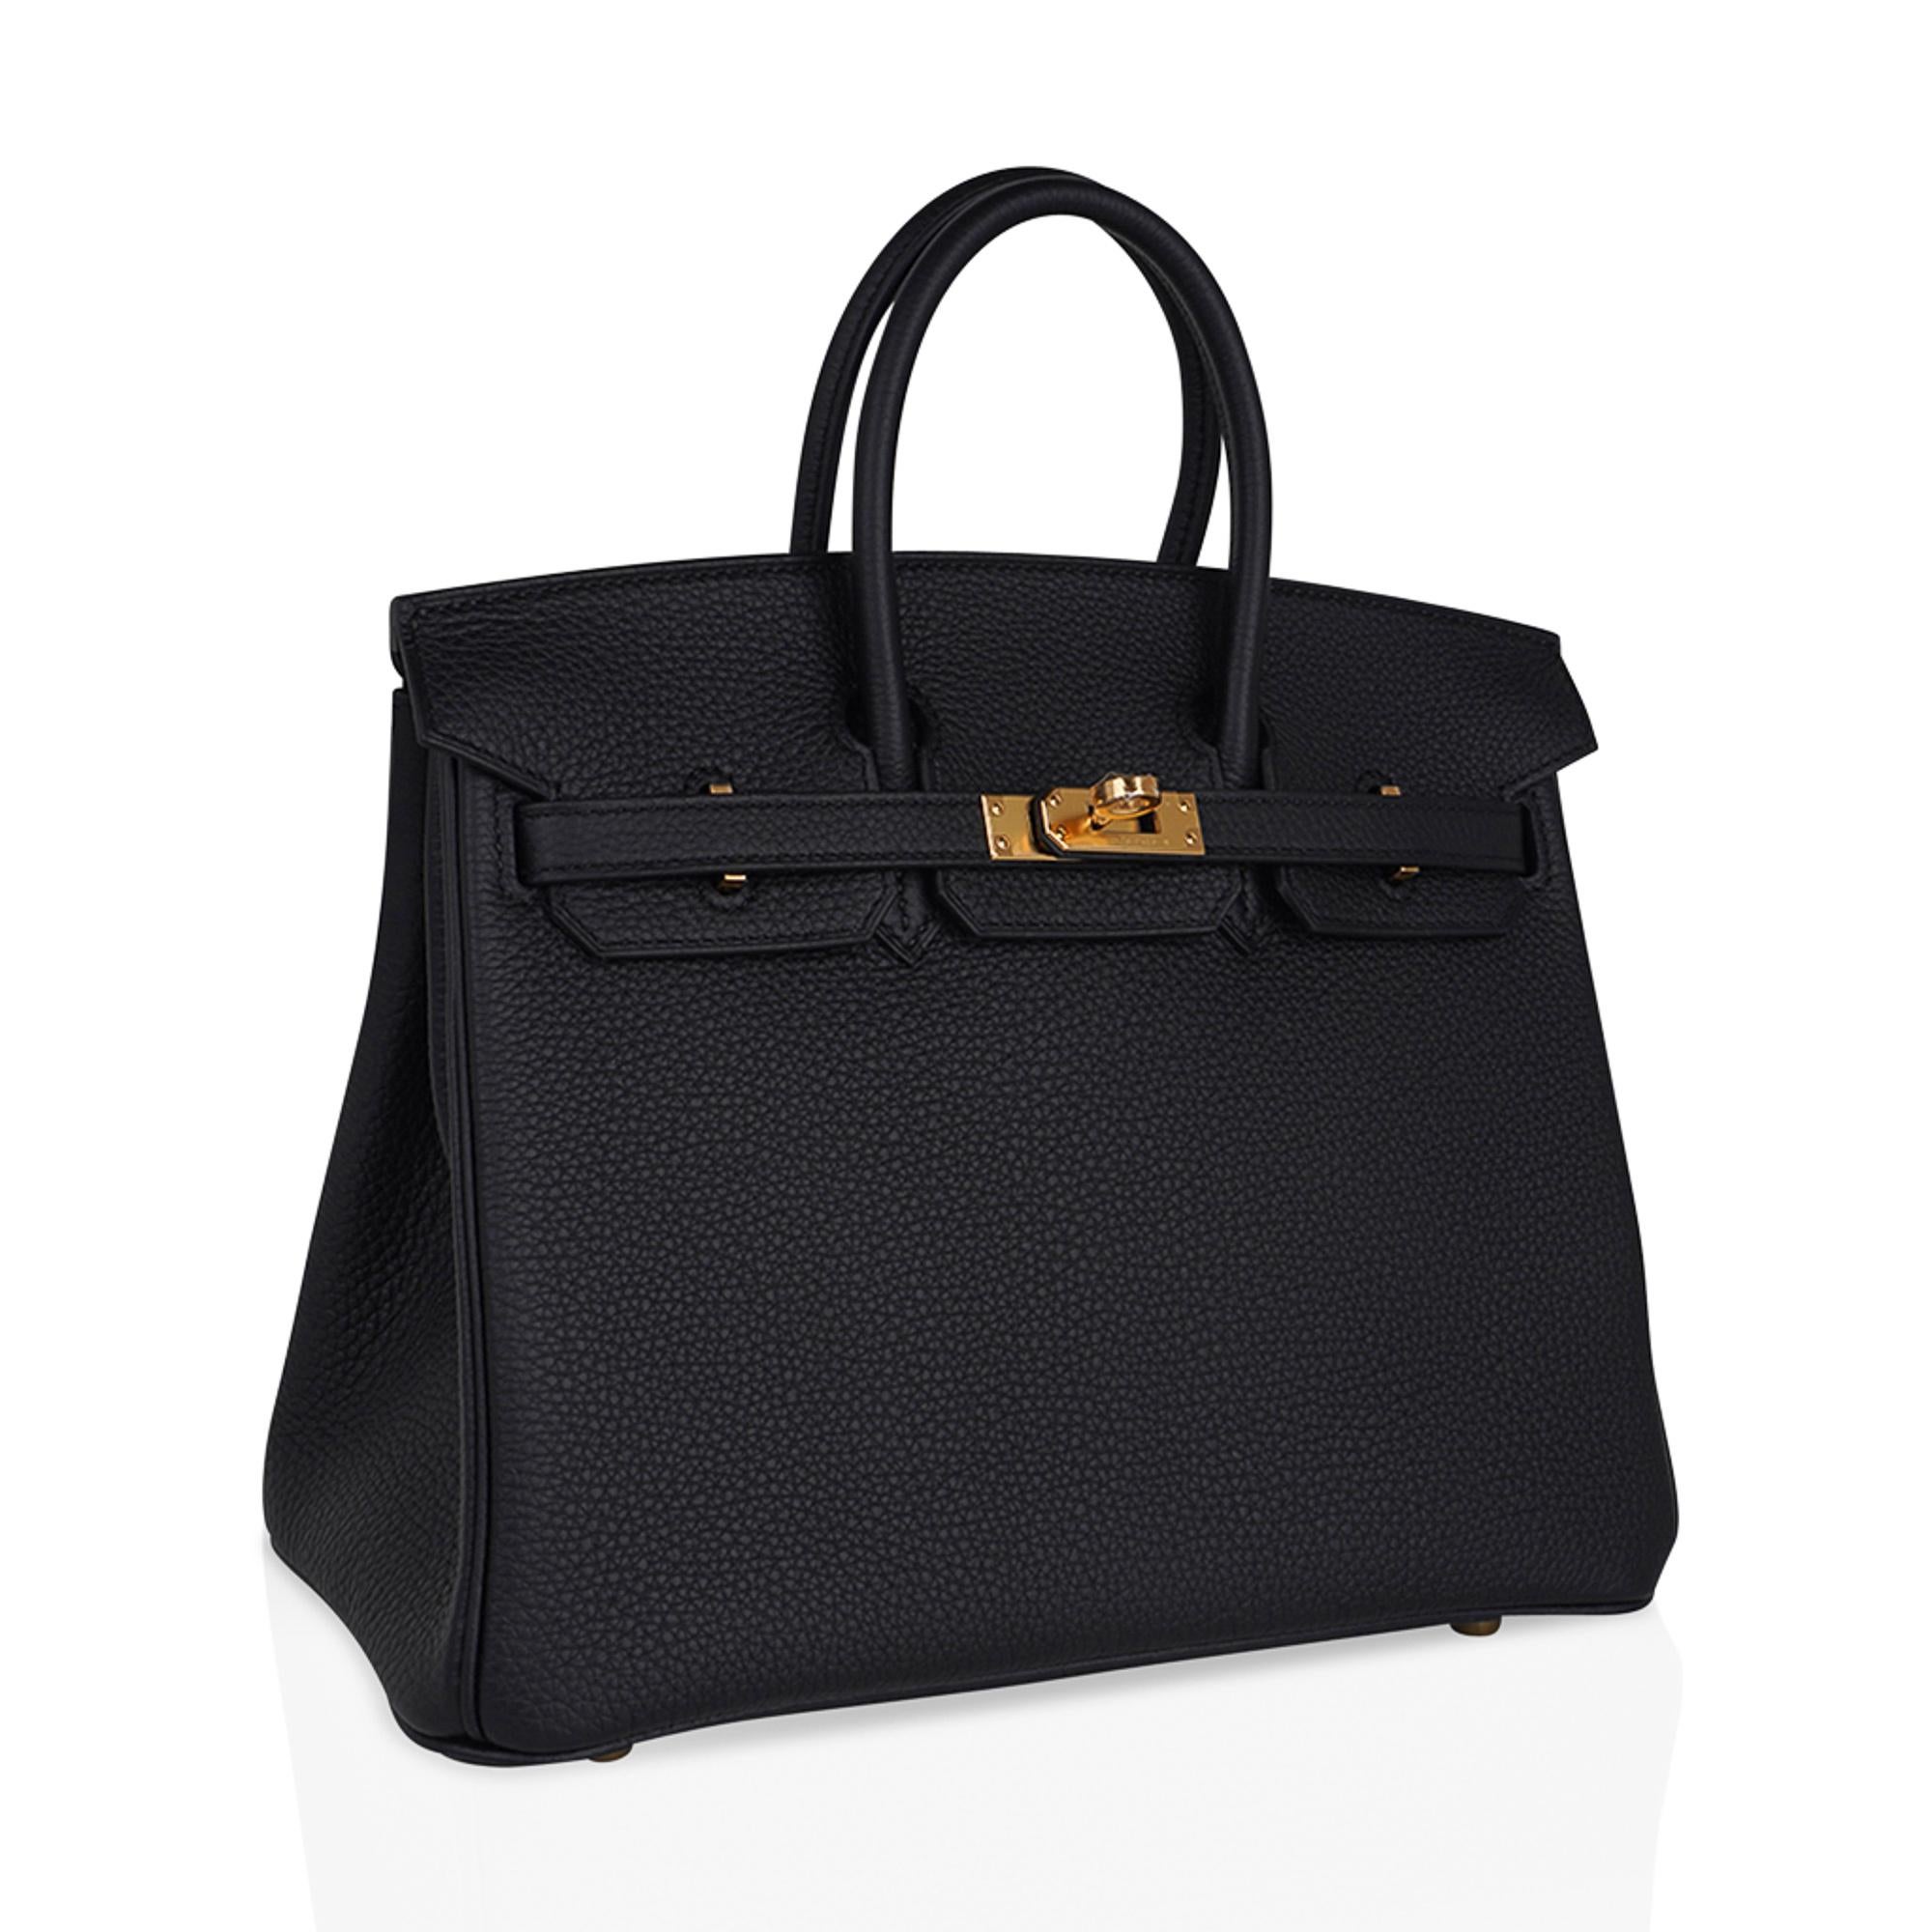 Mightychic offers an Hermes Birkin 25 bag featured in classic Black togo leather.
Rich with gold hardware this beauty is a chic bag day to evening.
Lush Togo leather is supple and scratch resistant.
Comes with lock, keys, clochette, sleepers,